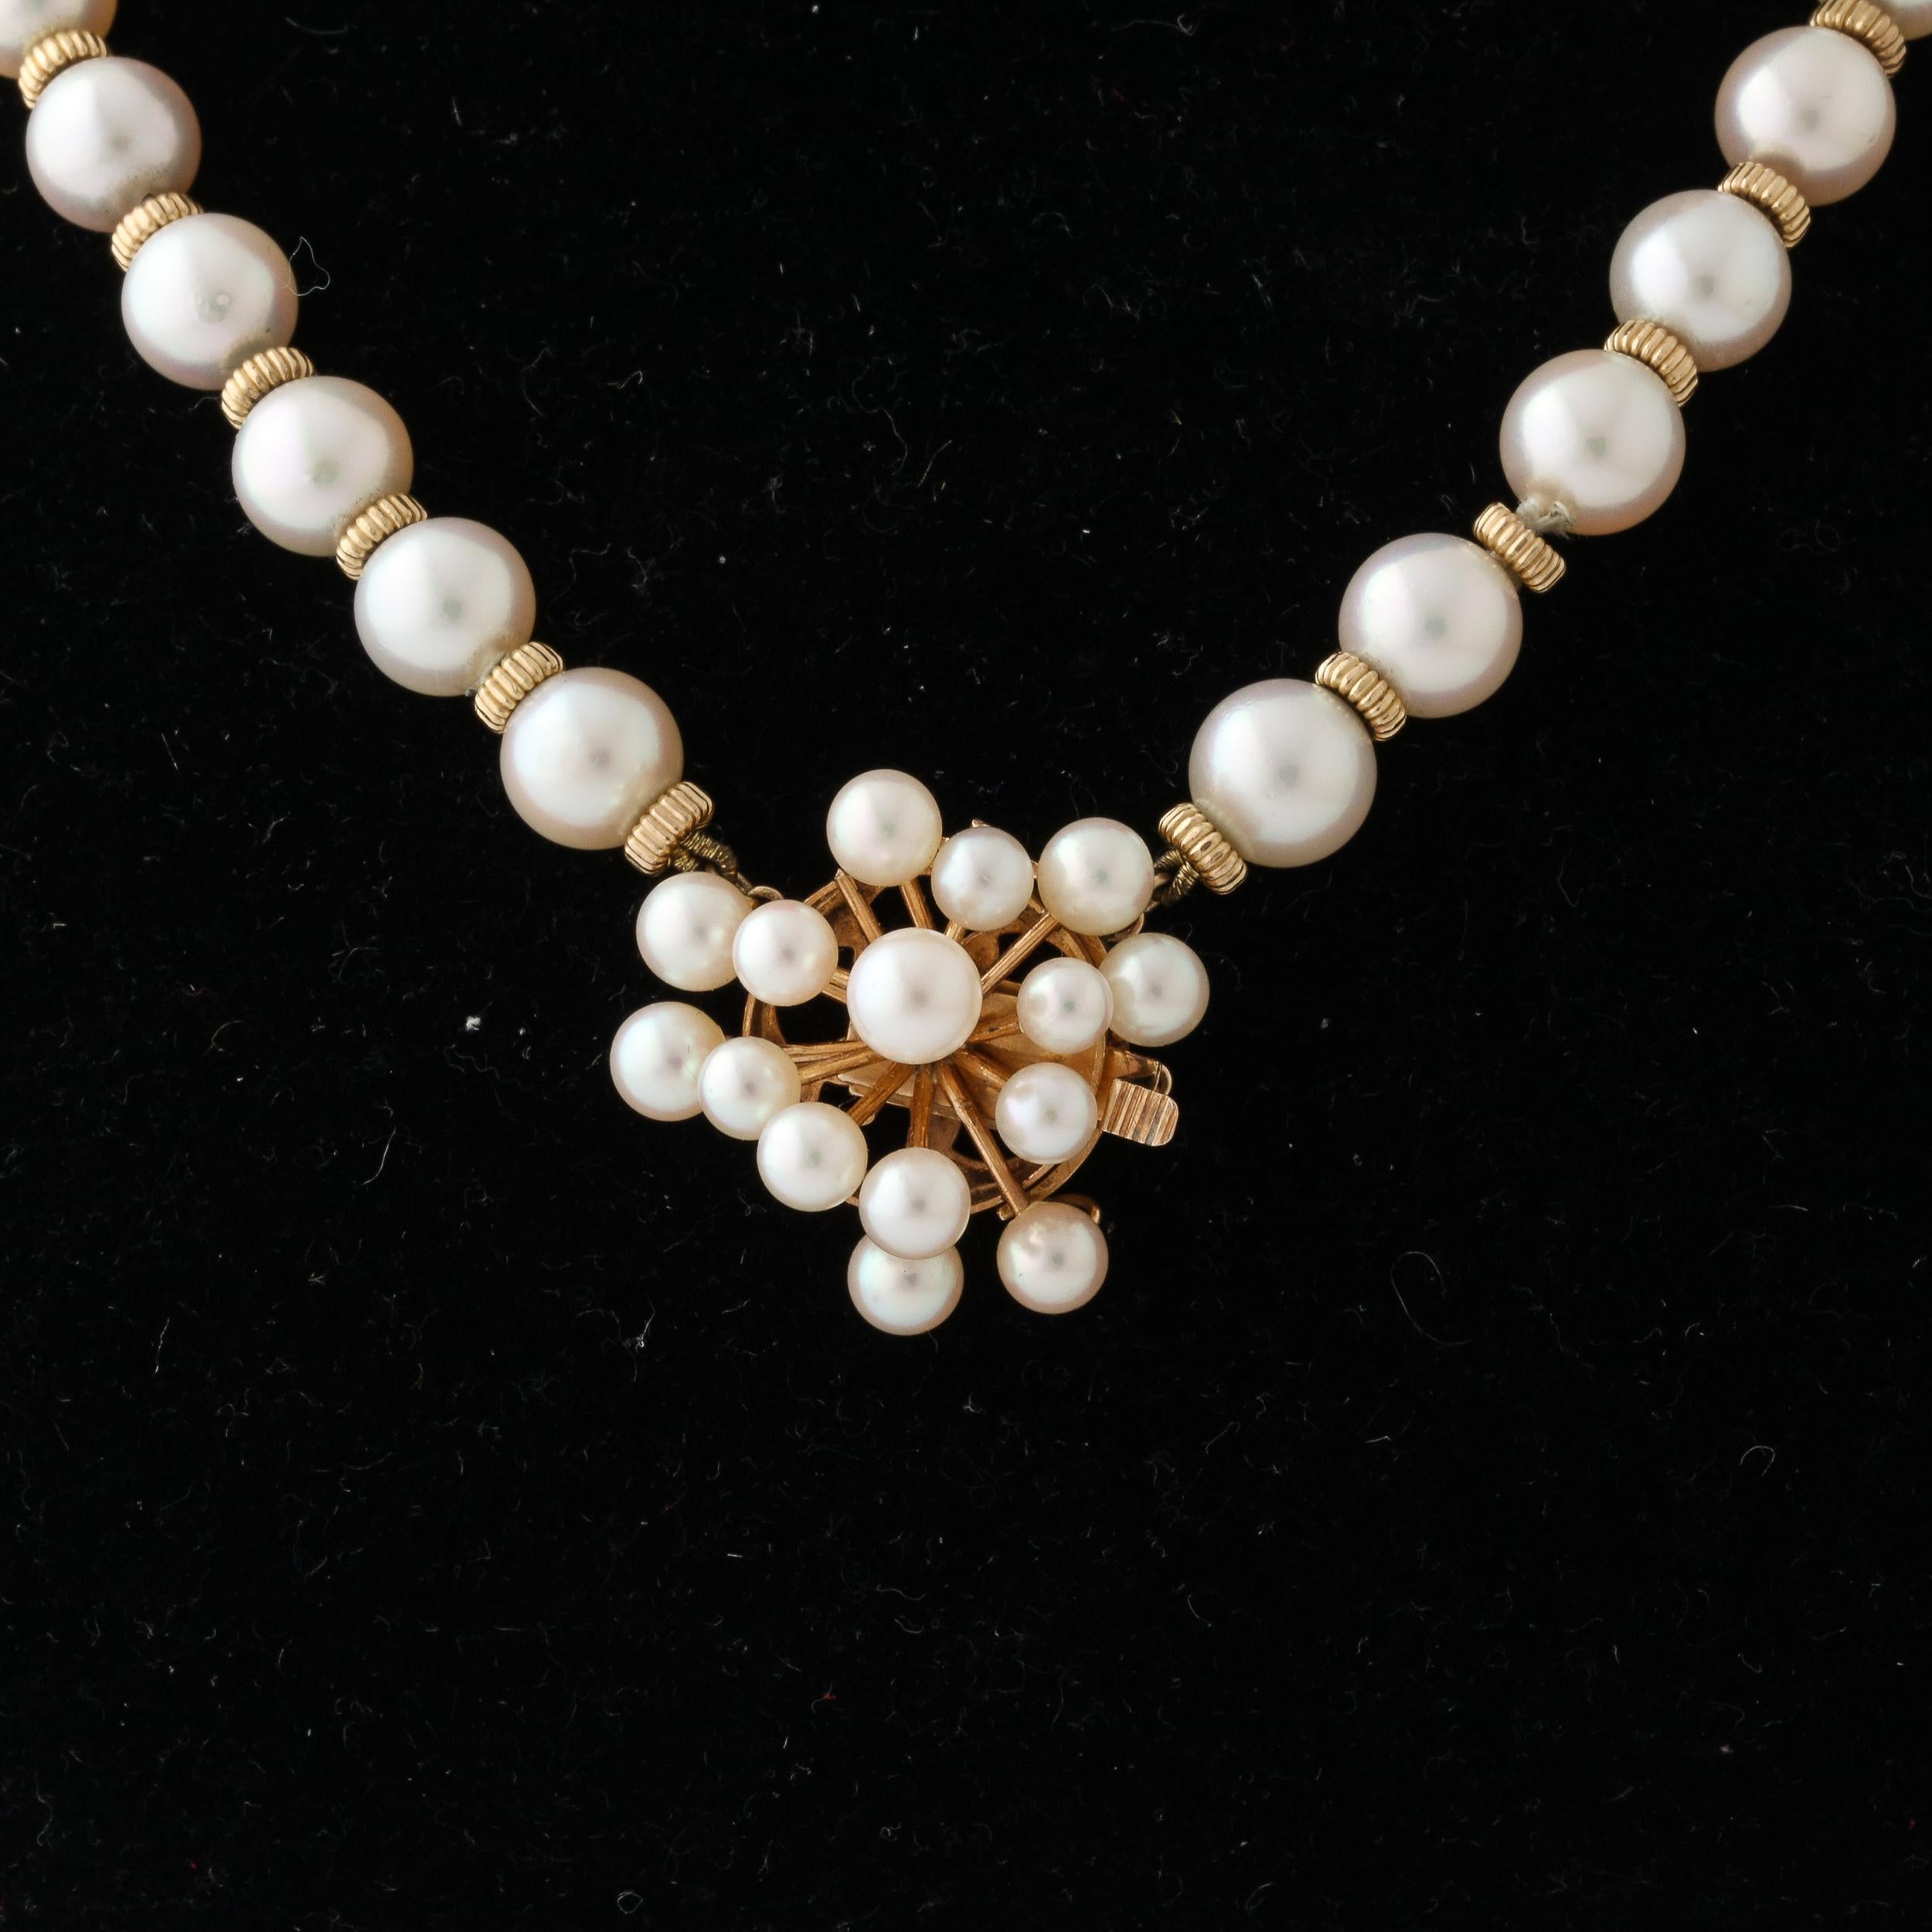 Women's or Men's Mid- century Modernist Pearl Necklace with Gold Spacers and Sputnik Clasp For Sale